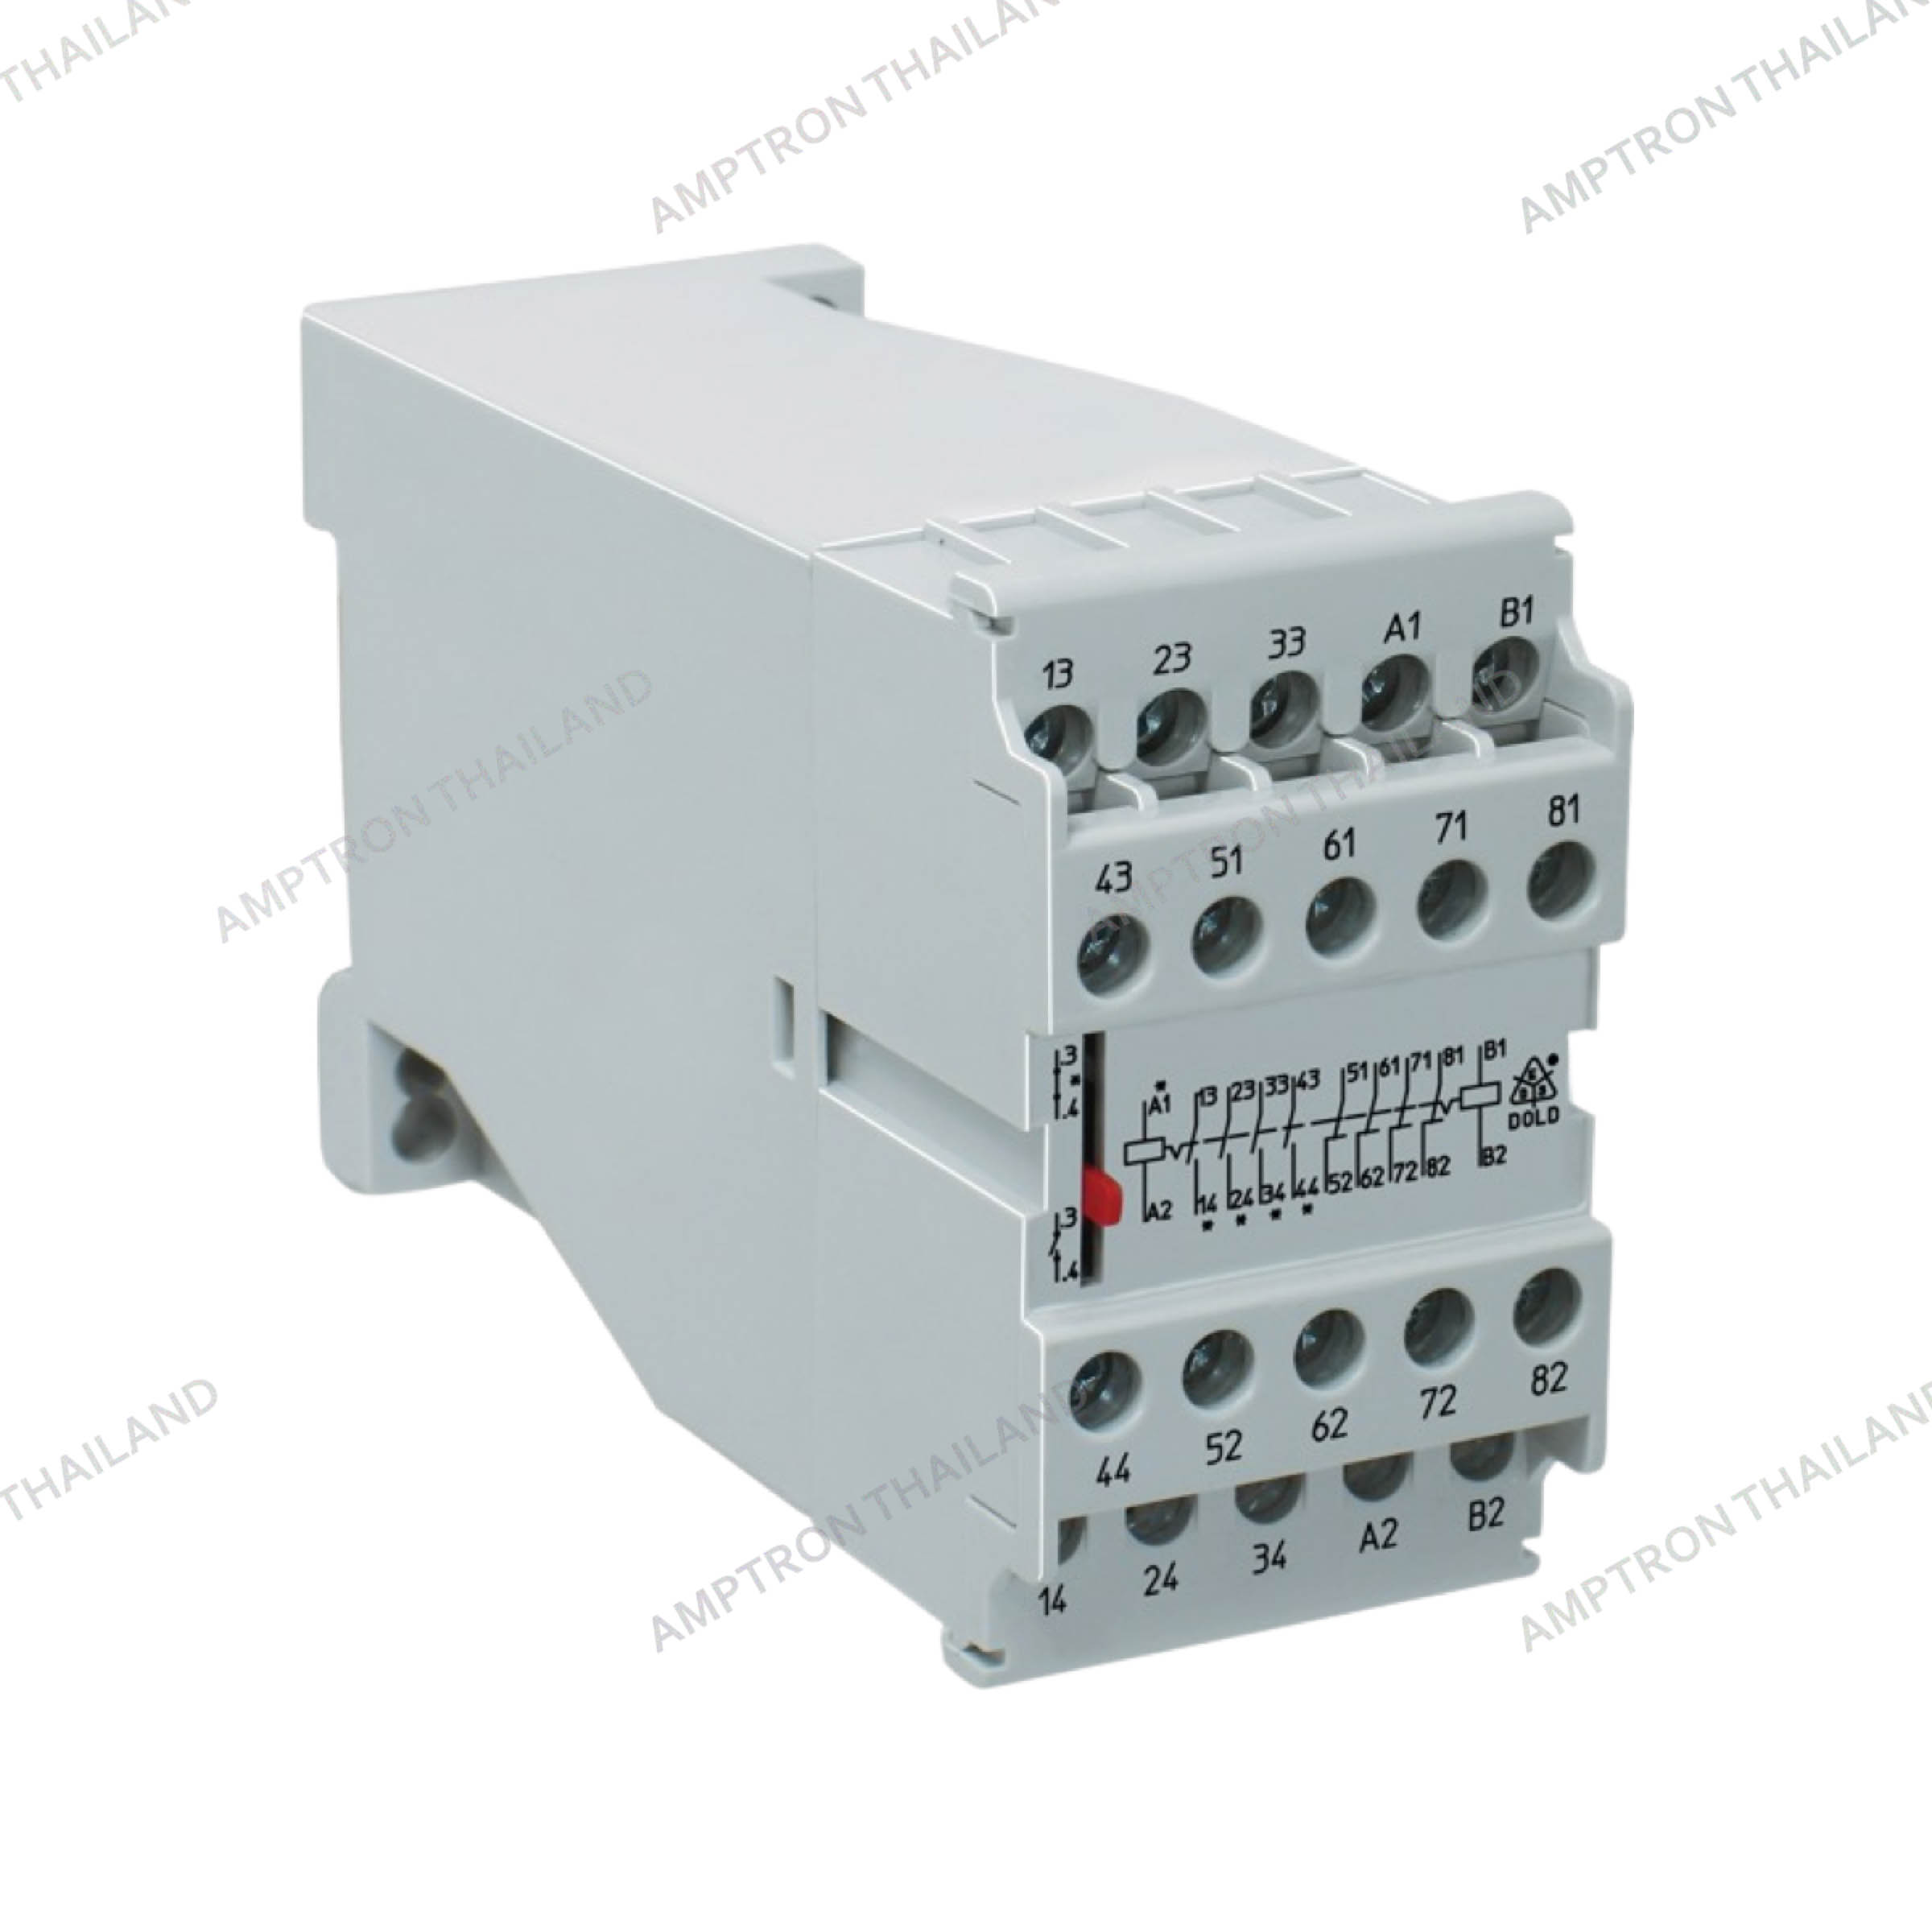 AD 8851 Latching Relay